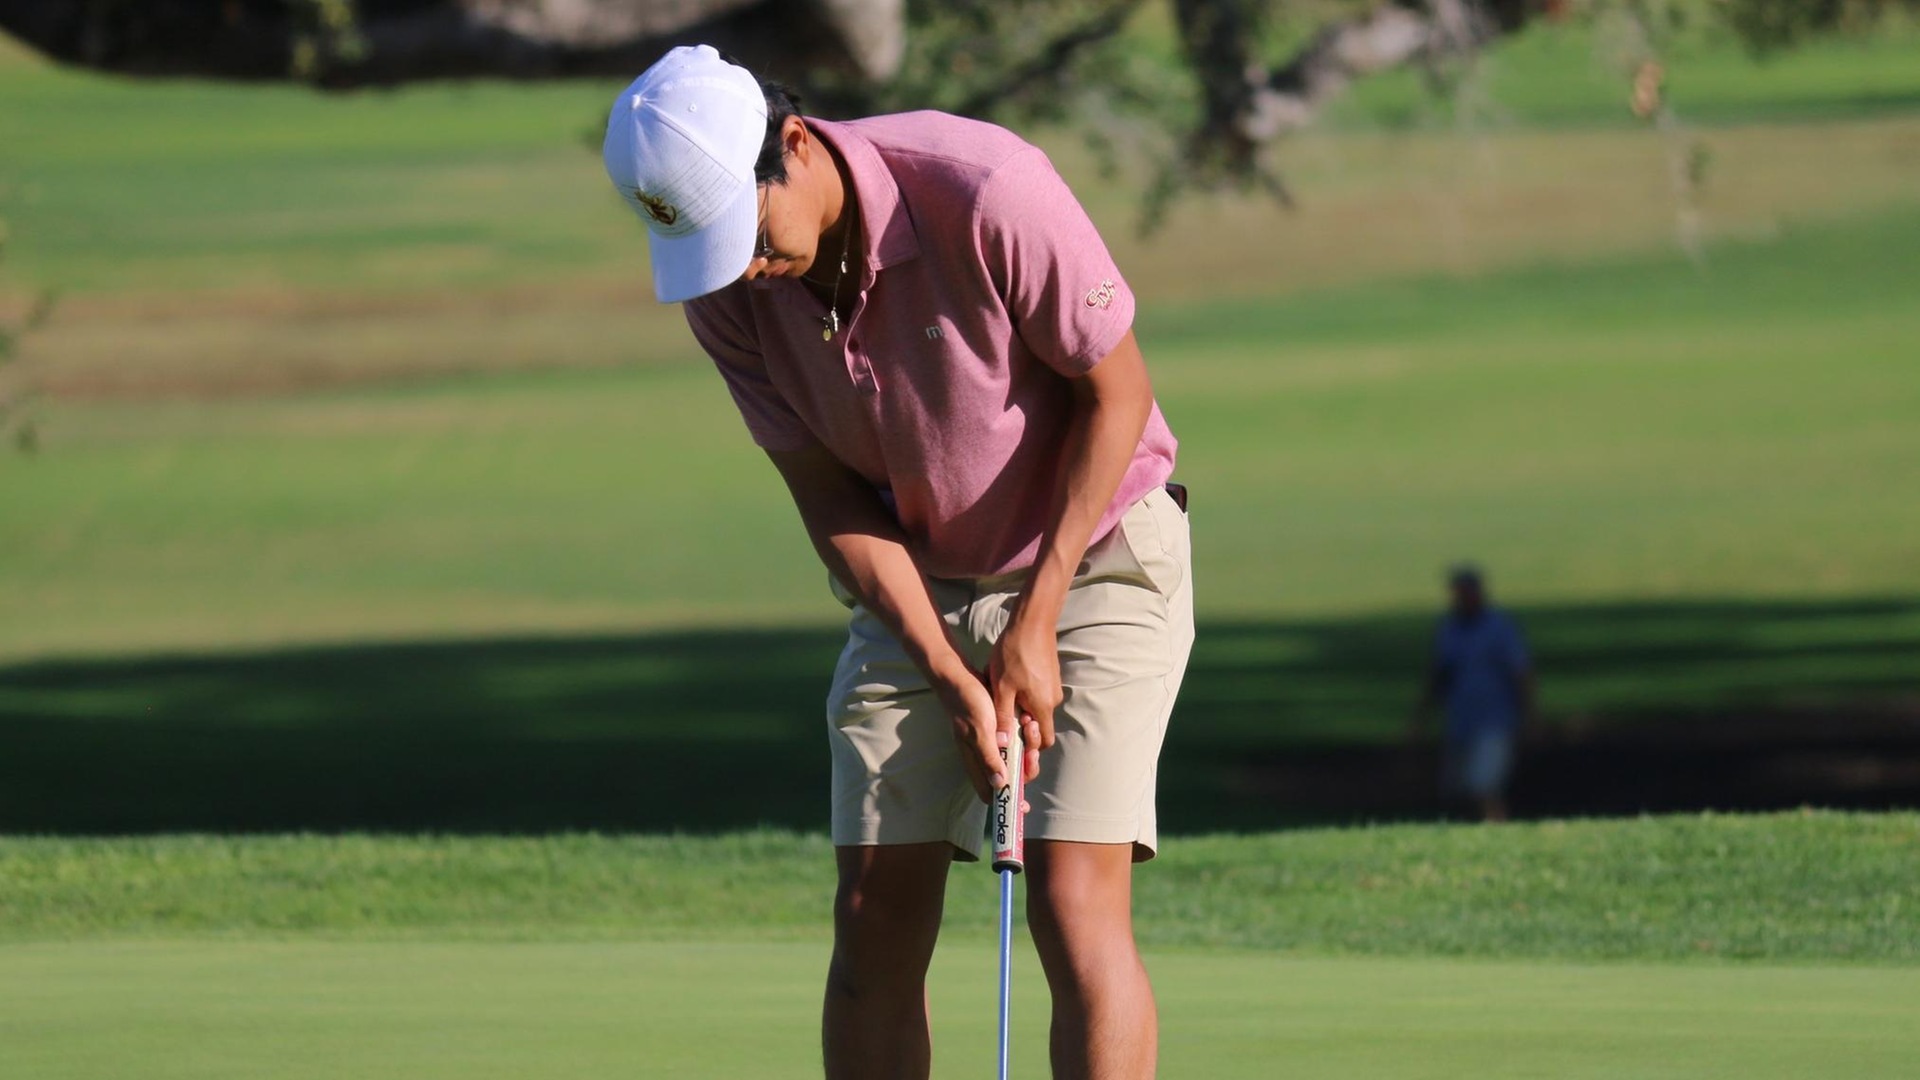 Kevin Jiang had his second bogey-free round of the weekend on Sunday.